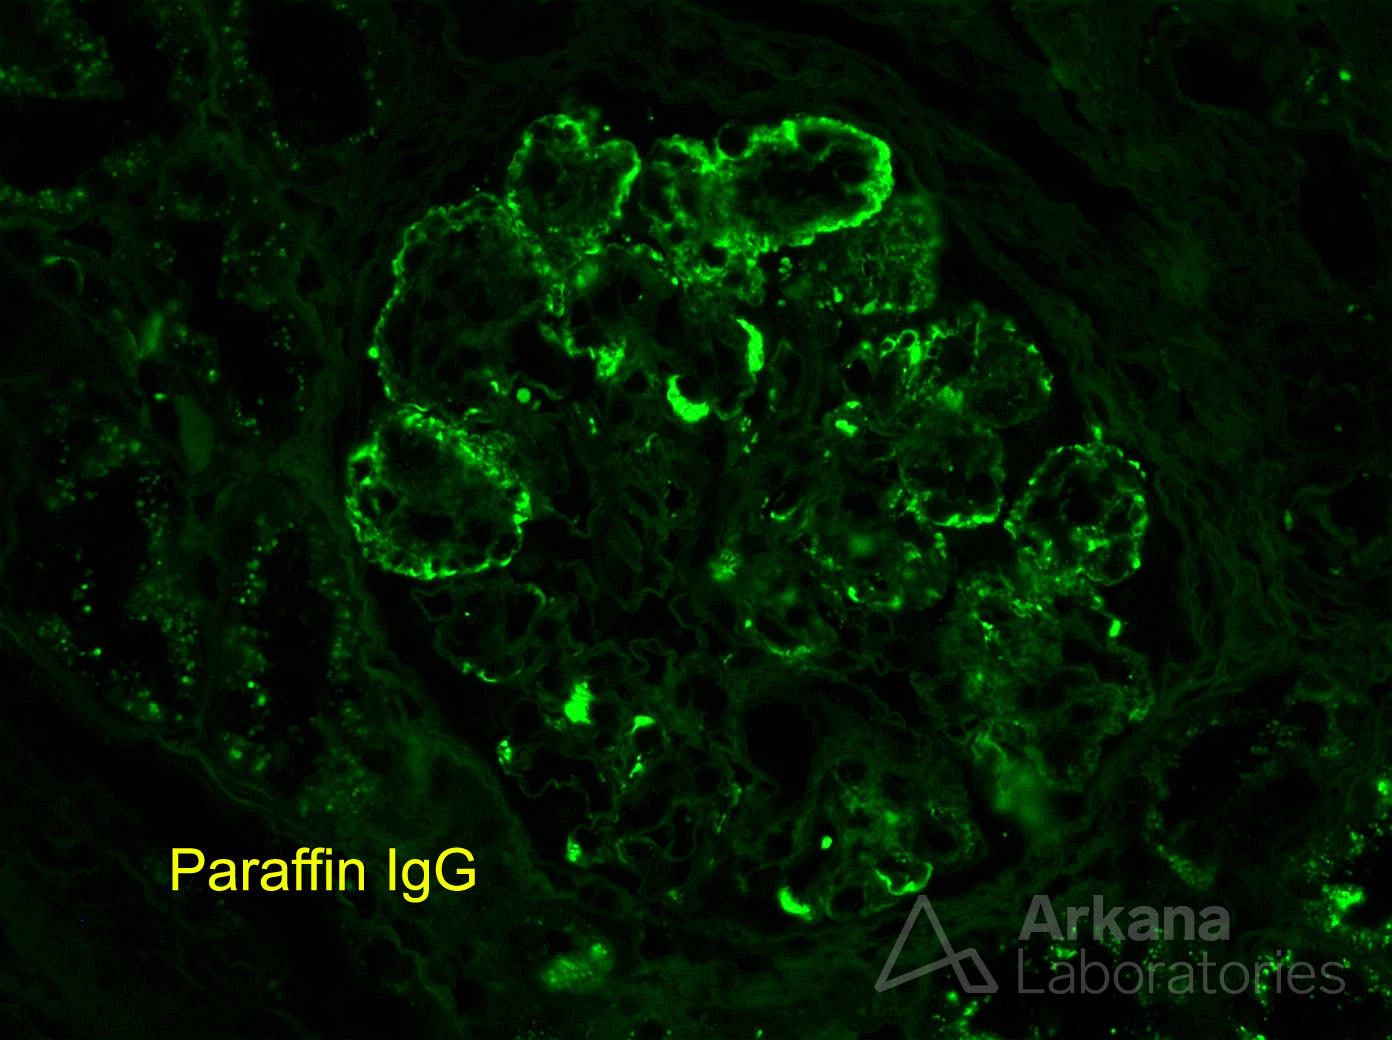 renal biopsy paraffin IgG stain showing Monoclonal gammopathy of renal significance